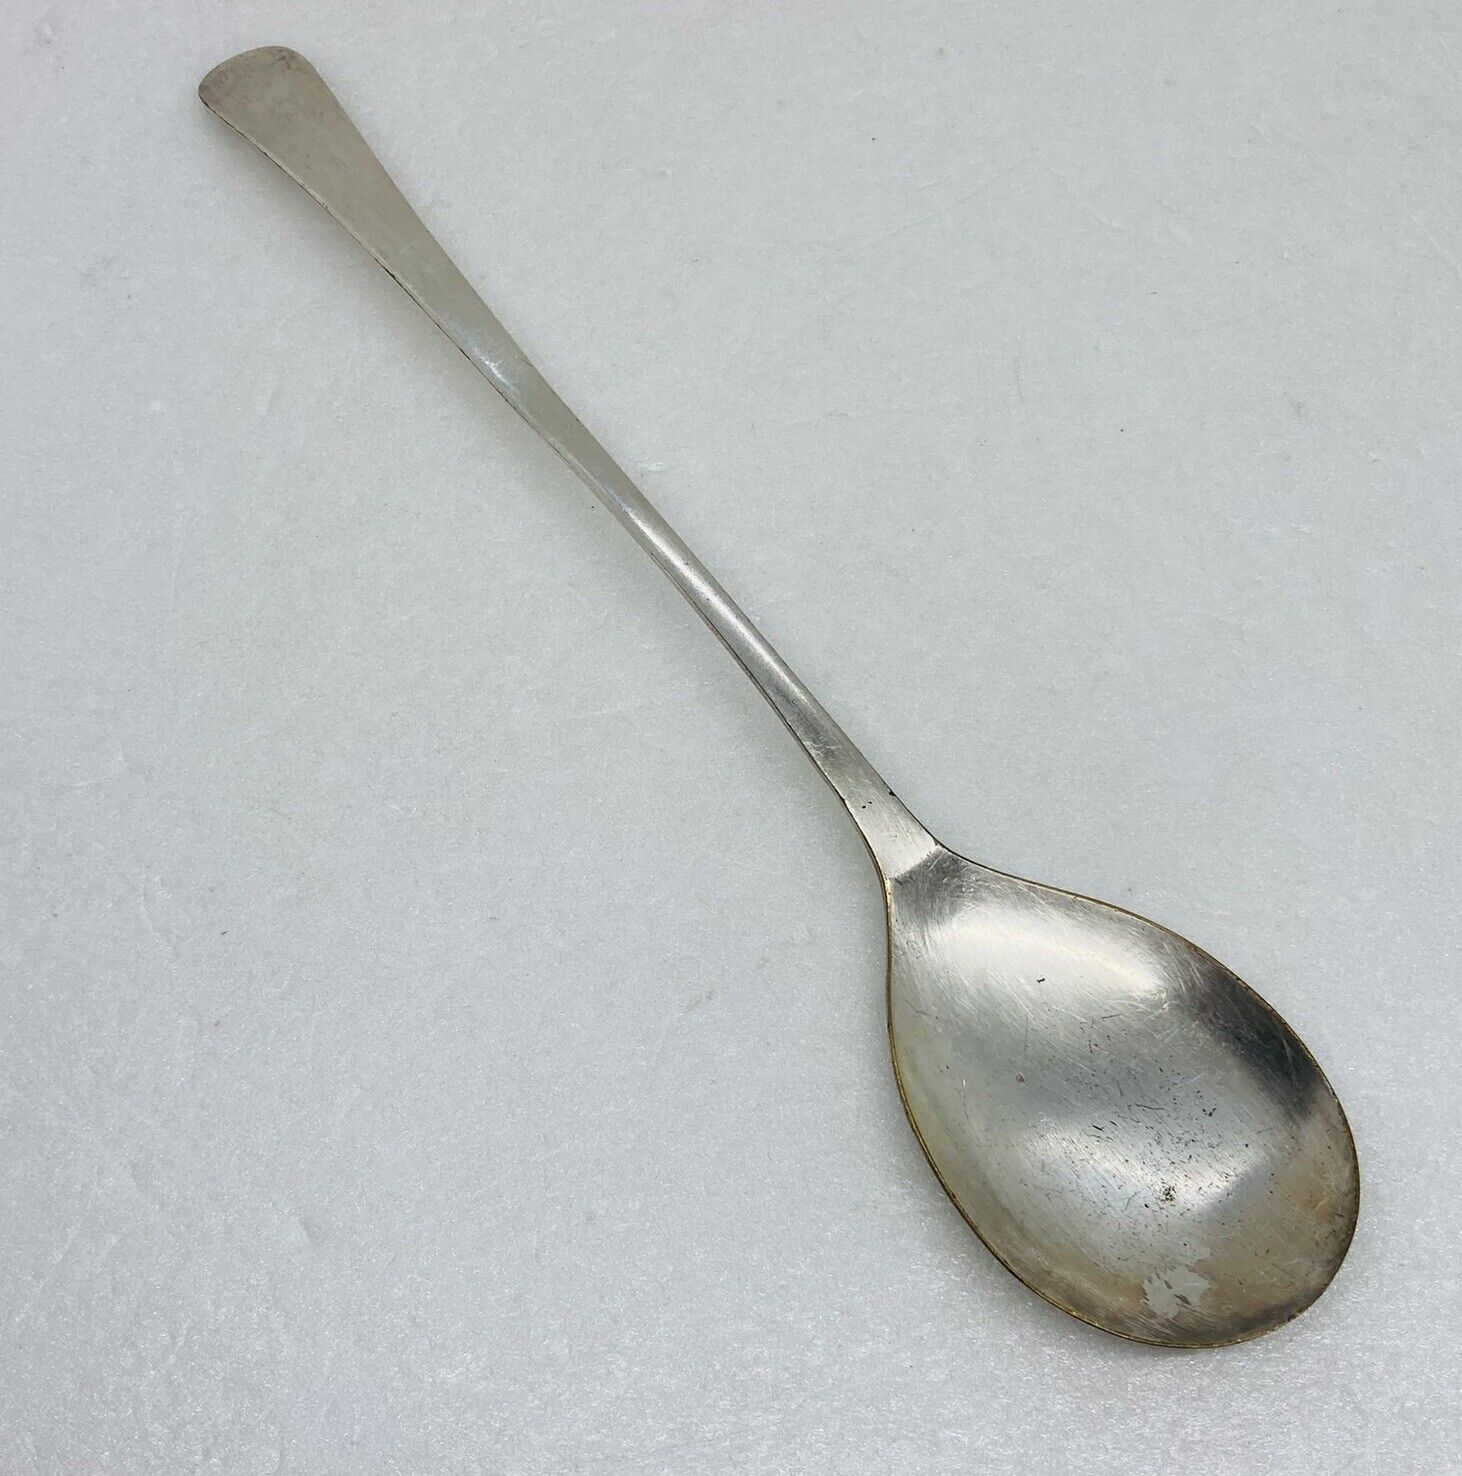 Vintage 1950s Silver Plated Serving Spoon 9.5” Long Handle England Made Decor 27